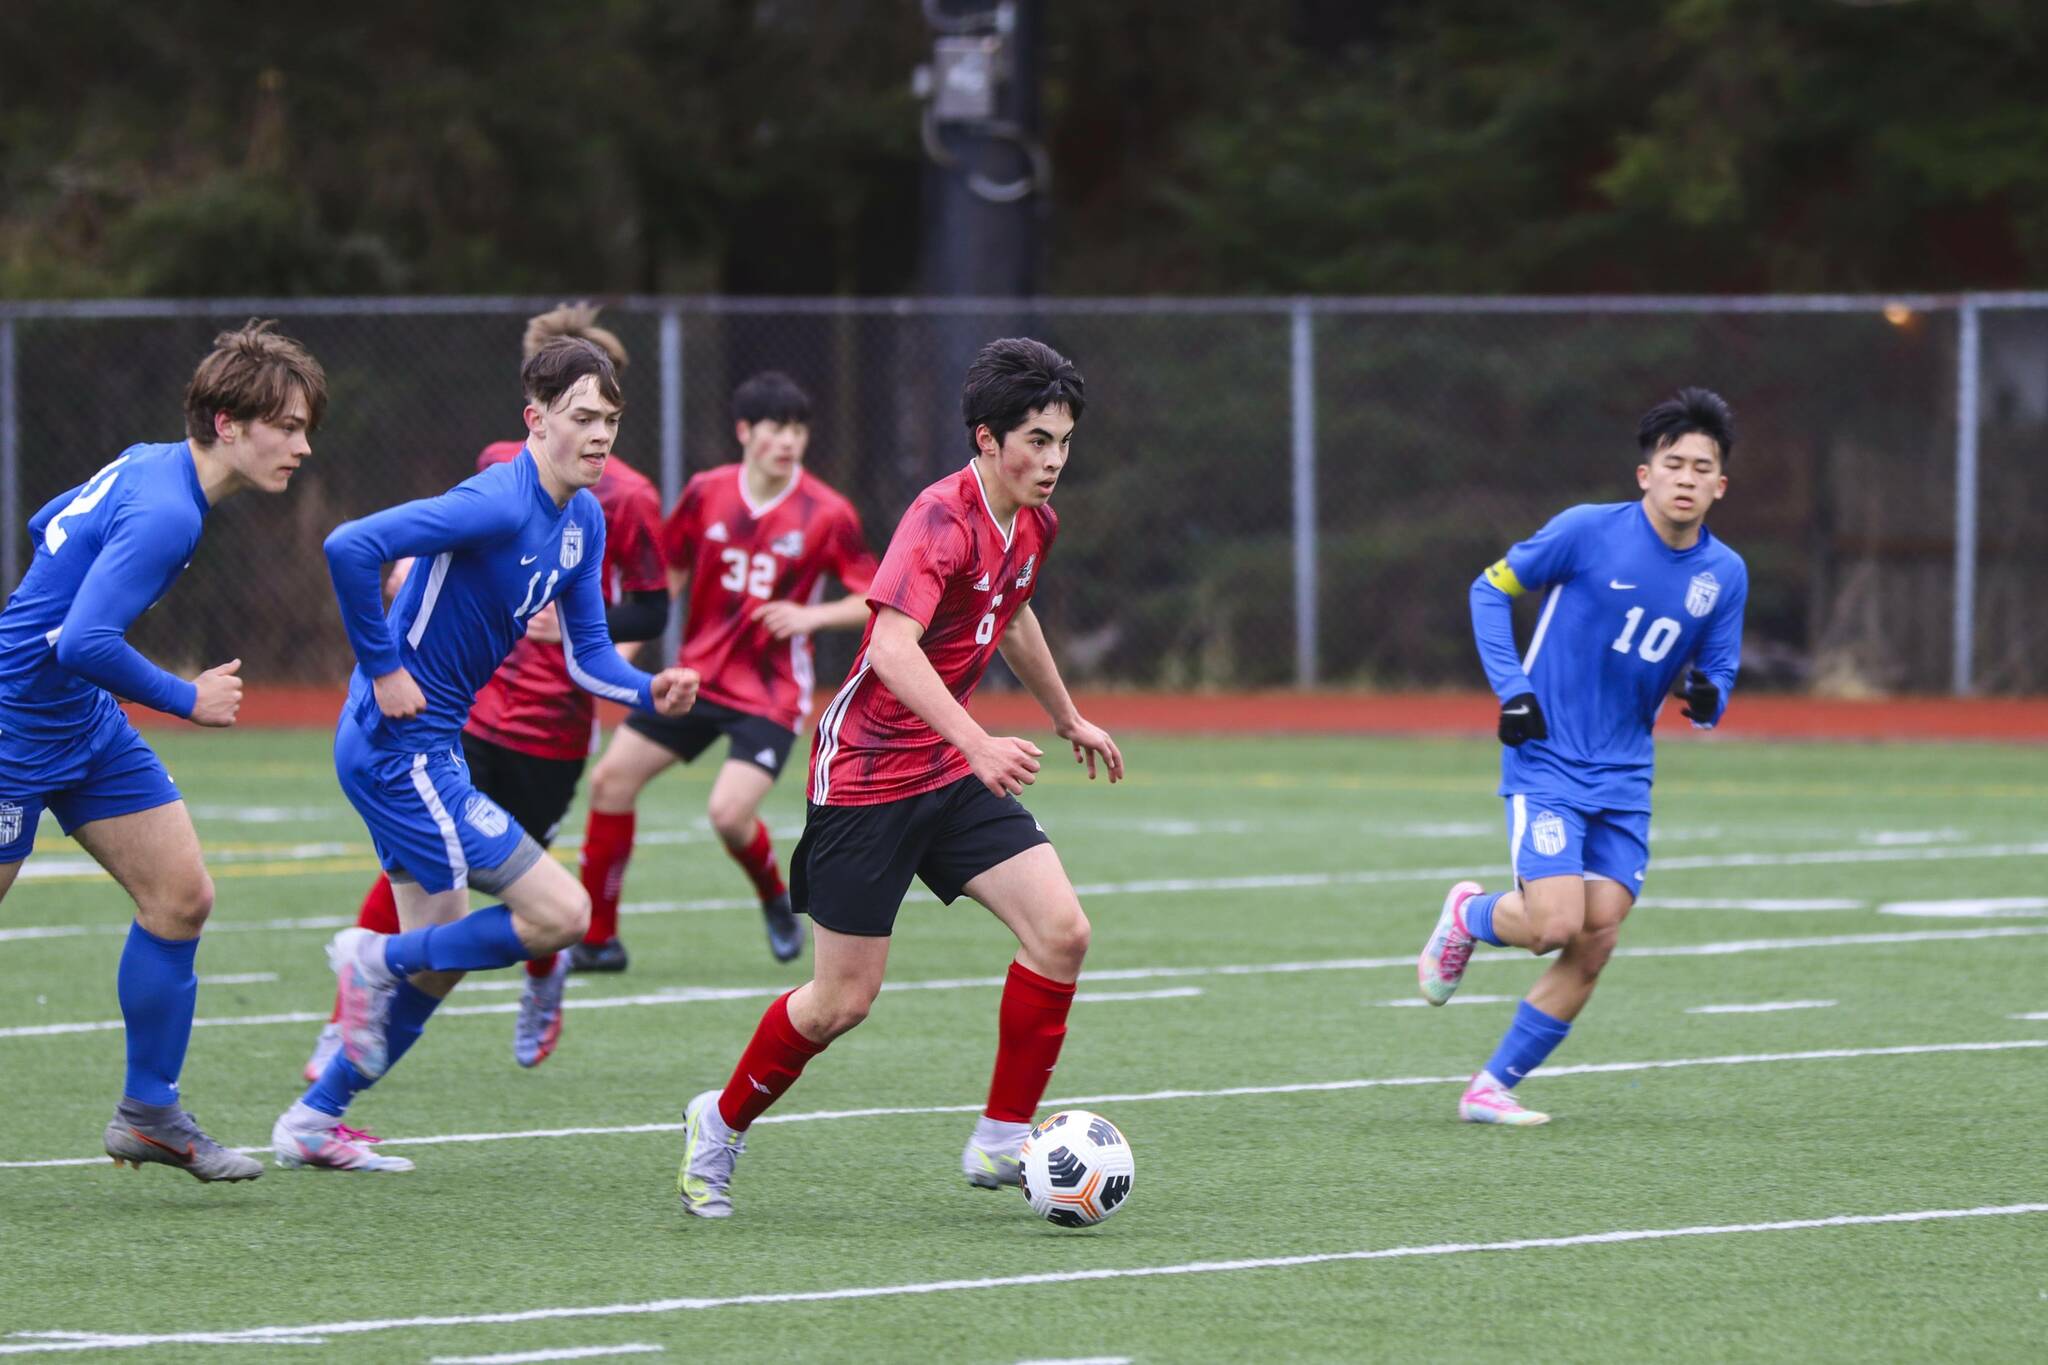 JDHS player Gabe Cheng drives down the field with the ball during a tight game against TMHS on April 23, 2022. (Michael S. Lockett / Juneau Empire)